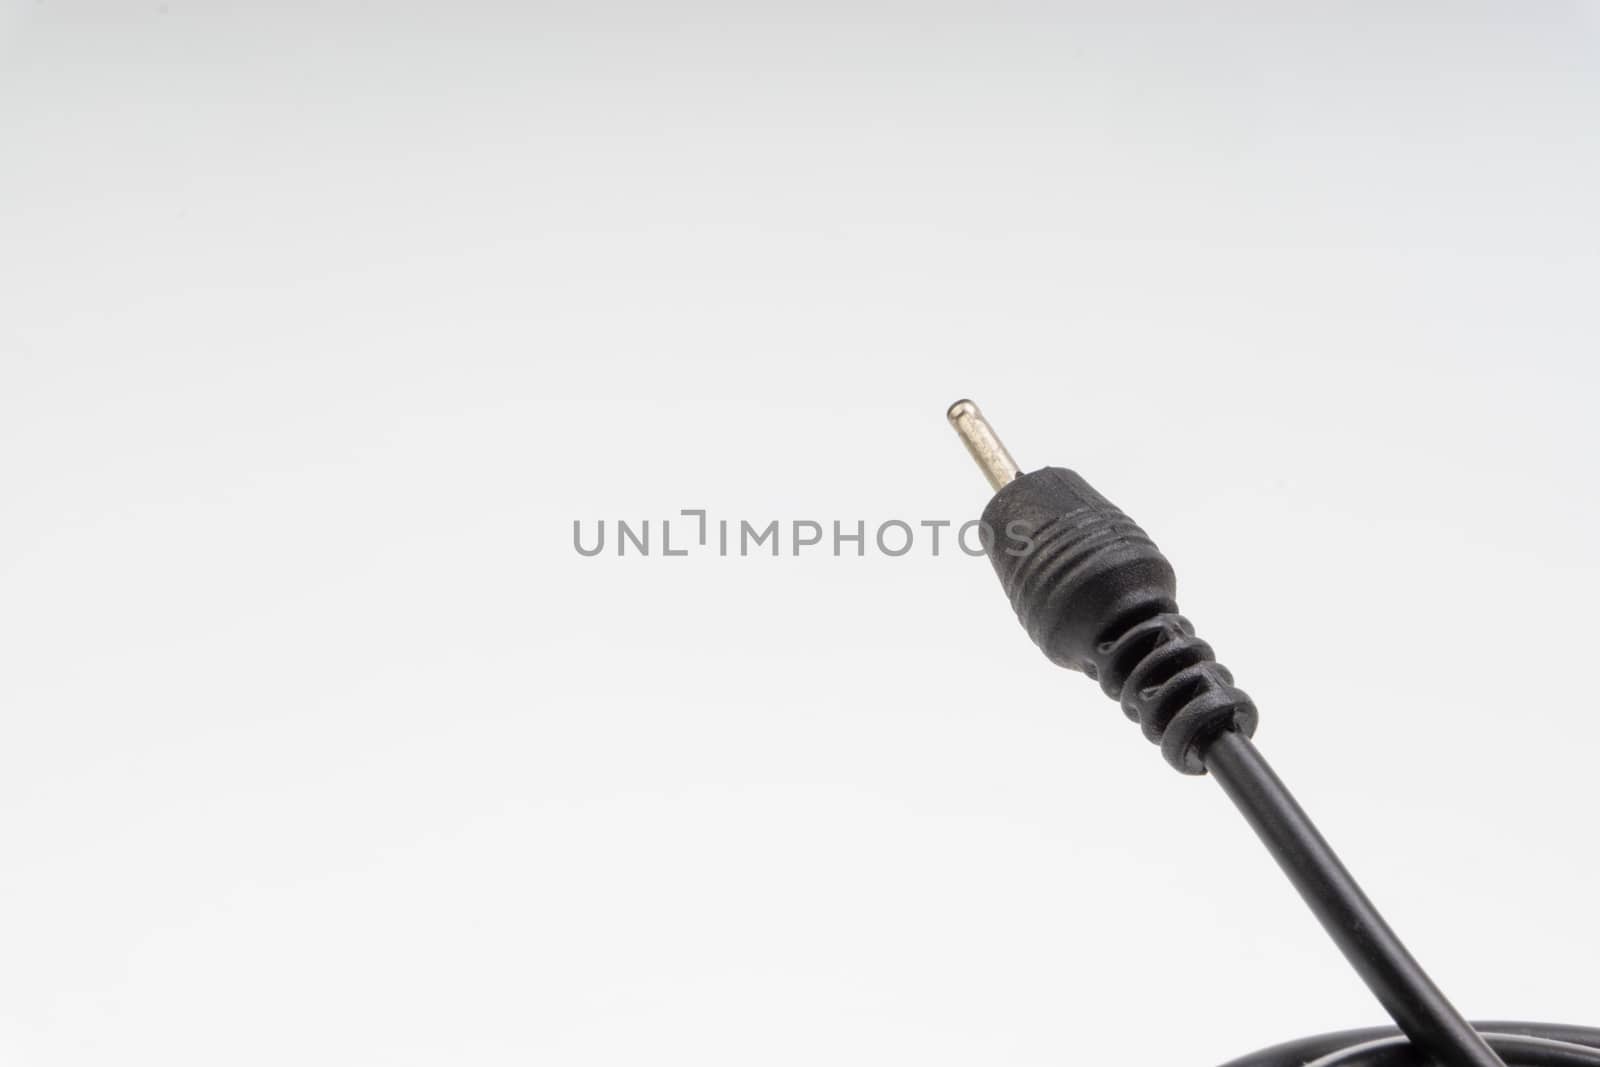 Universal recharger head or usb cable isolated on white background. Selective focus and crop fragment